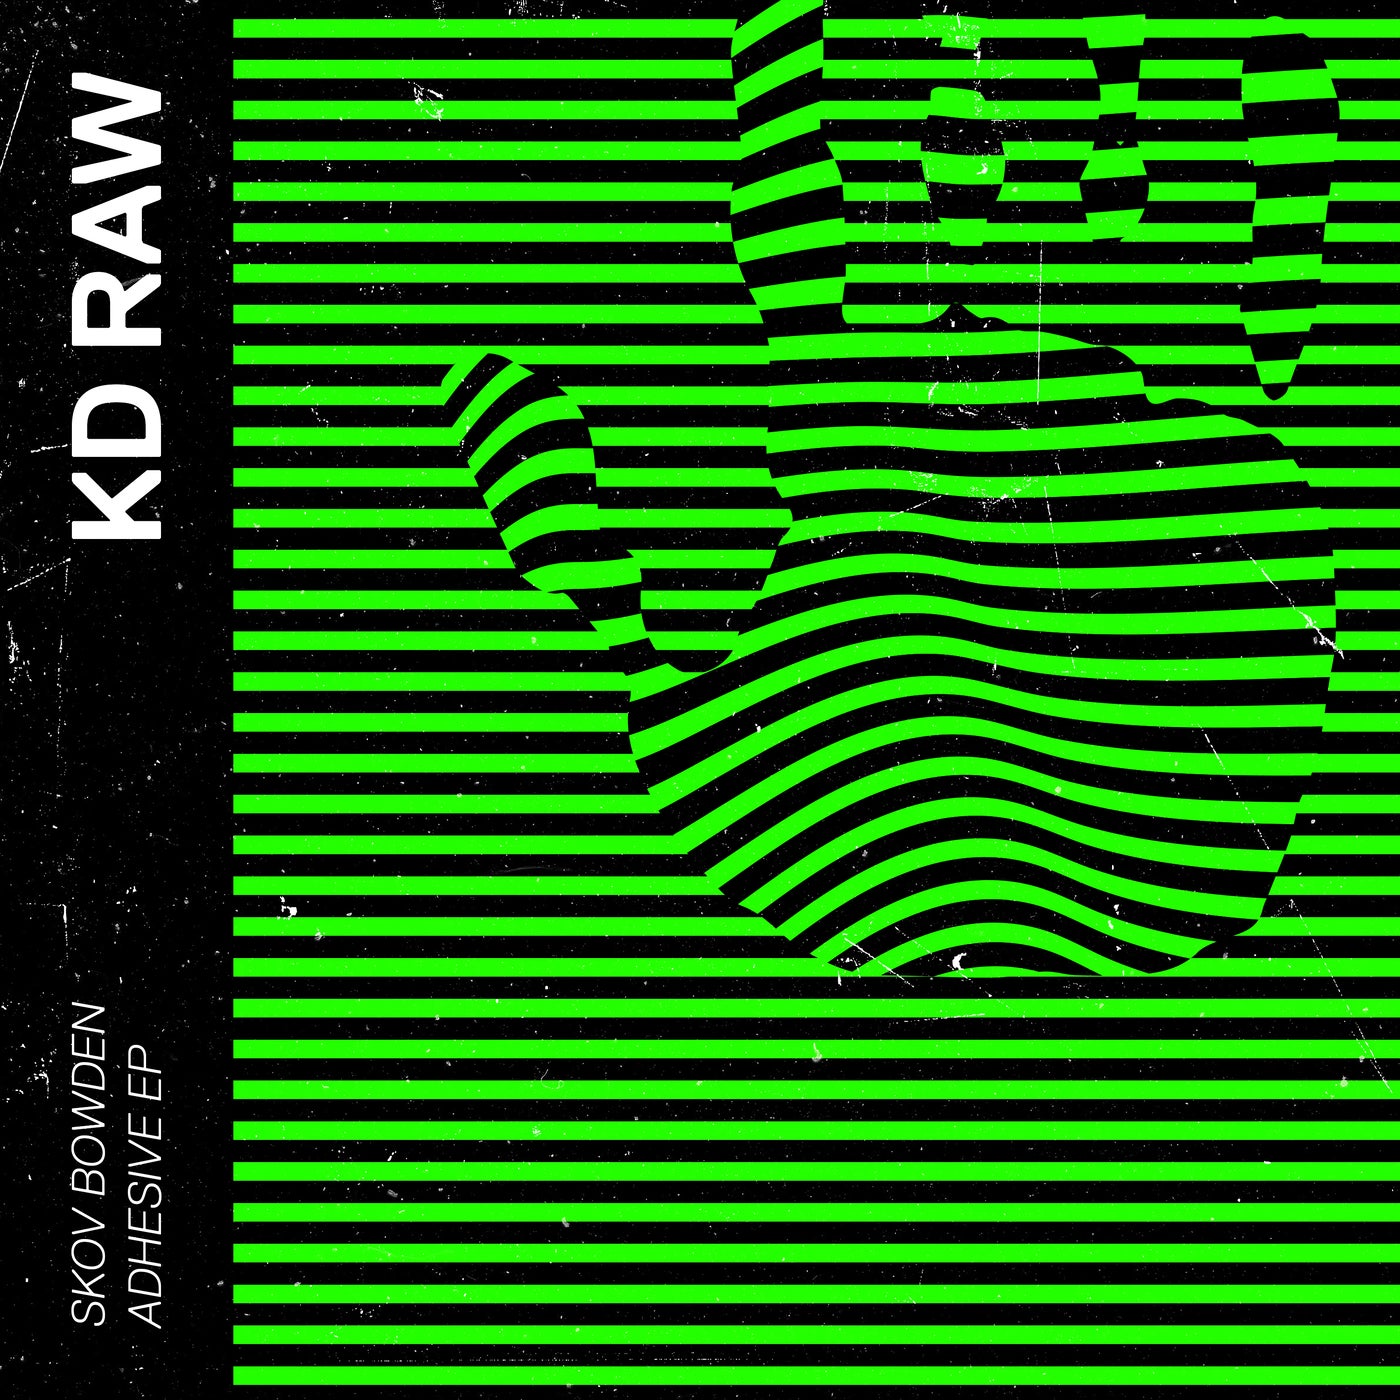 image cover: Skov Bowden - Adhesive EP / KDRAW065